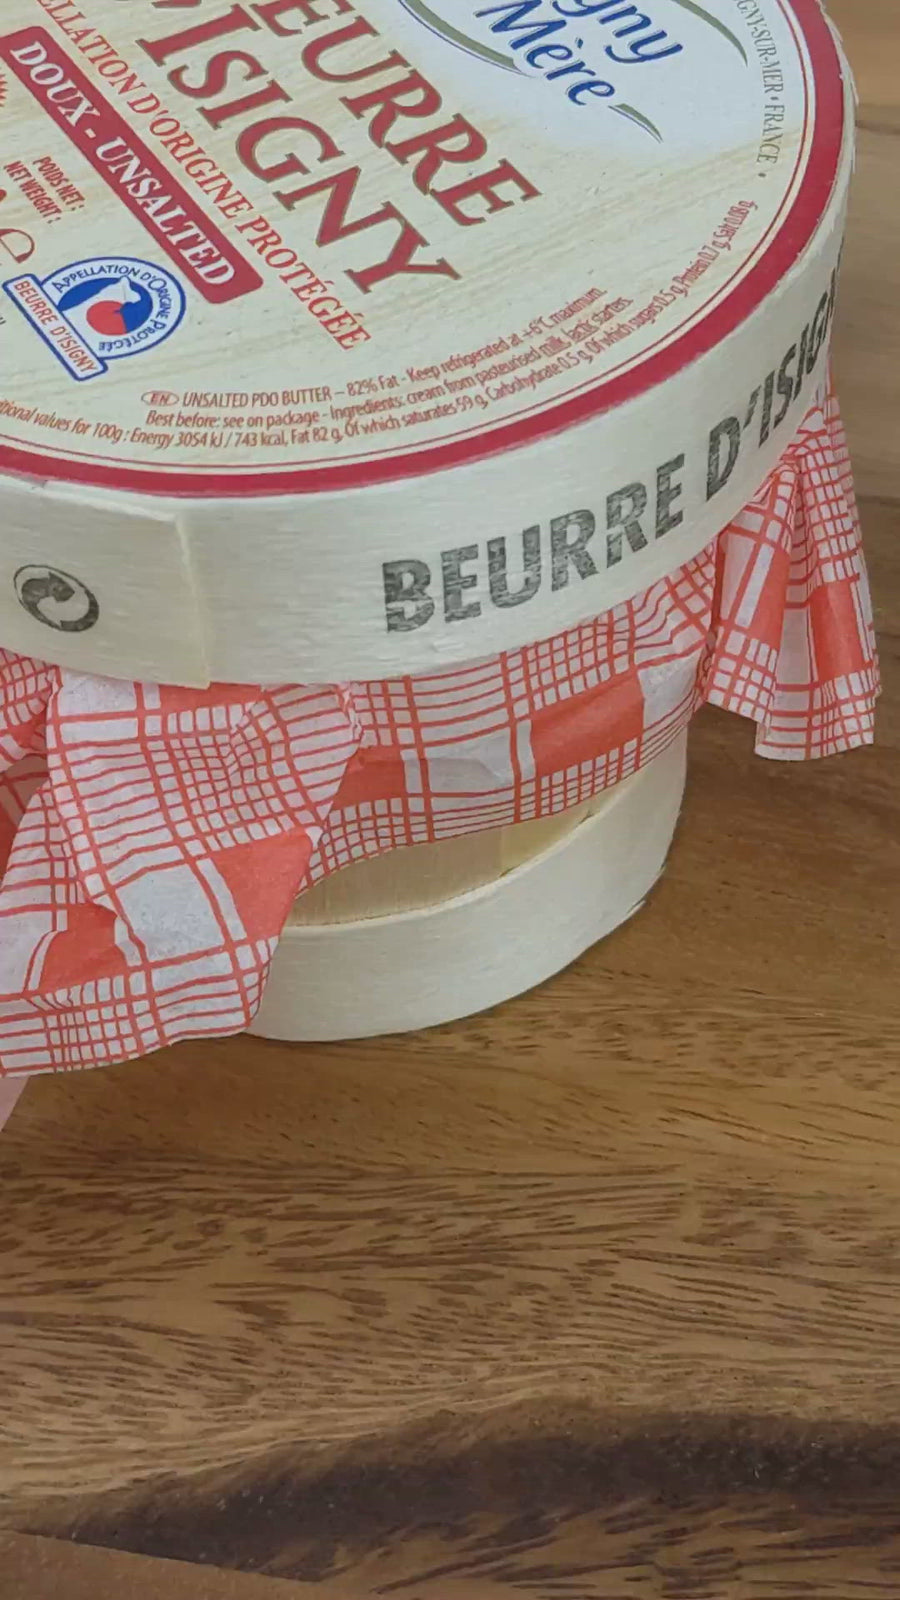 Beurre D’Isigny AOP French Unsalted Butter Basket.mp4